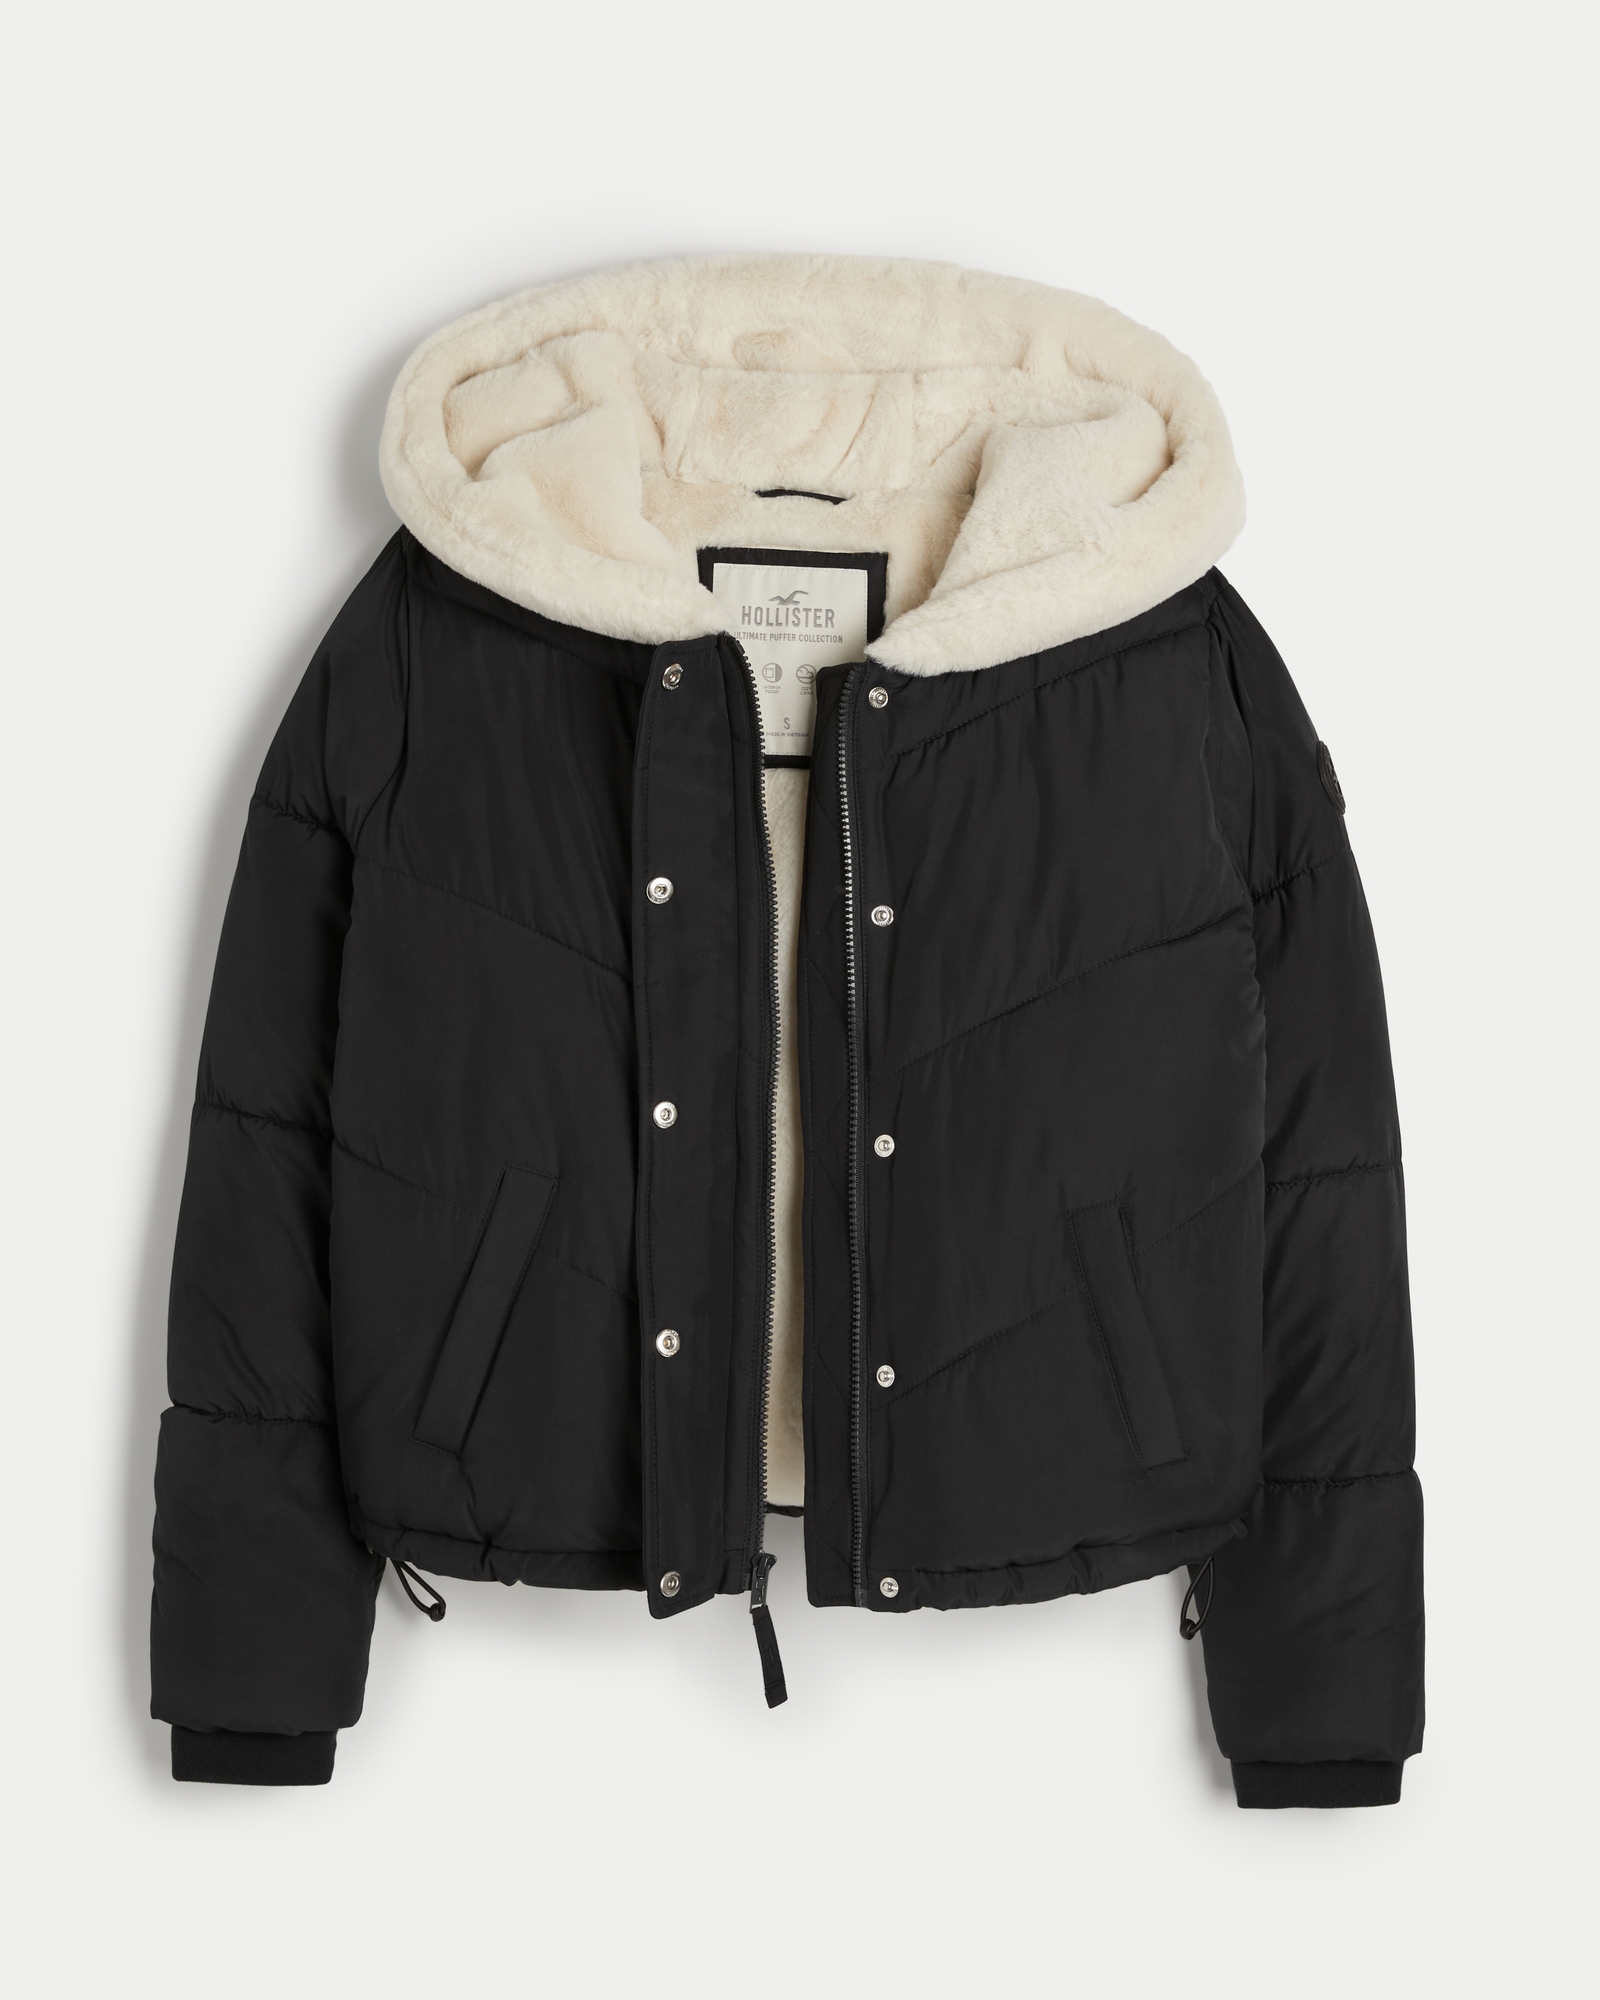 Hollister puffer jacket, Men's Fashion, Coats, Jackets and